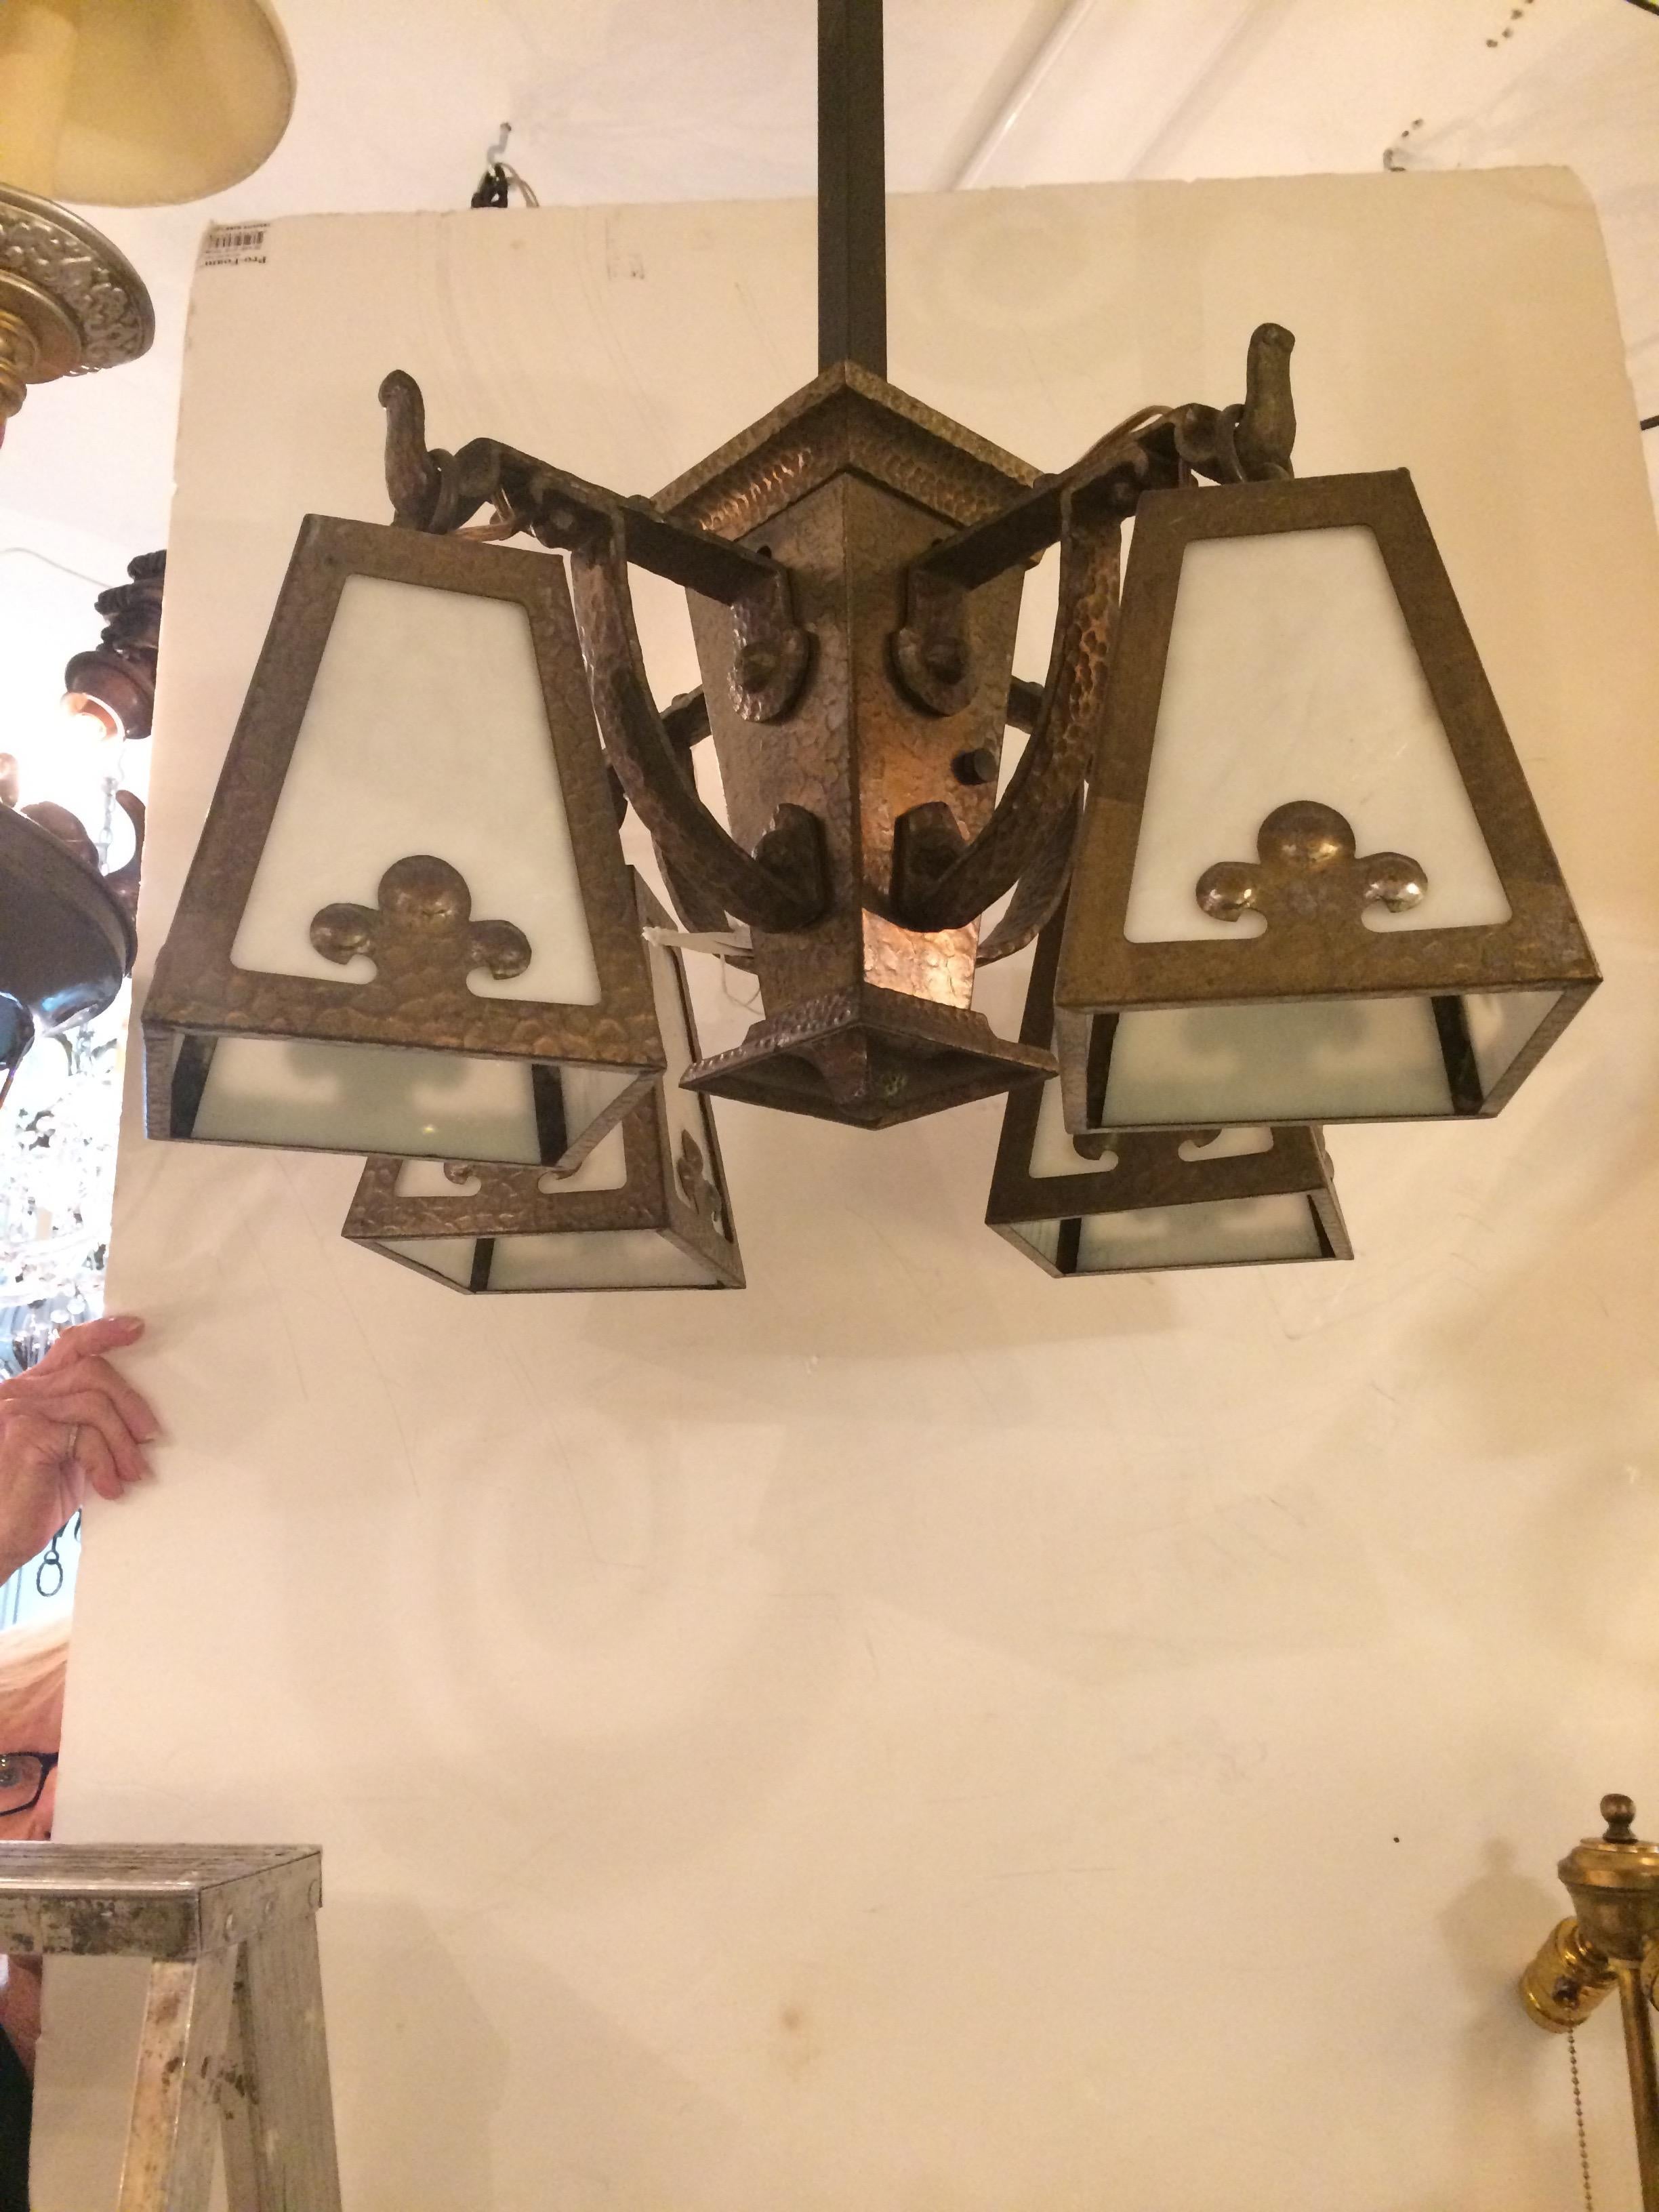 Impressive Arts & Crafts hammered brass light fixture having four white art glass shades with Fleur-de-lis motif, a long brass square rod and matching original ceiling cap. Rewired with porcelain sockets.
Shades are 7.5 inches height 5.5 wide
Rod